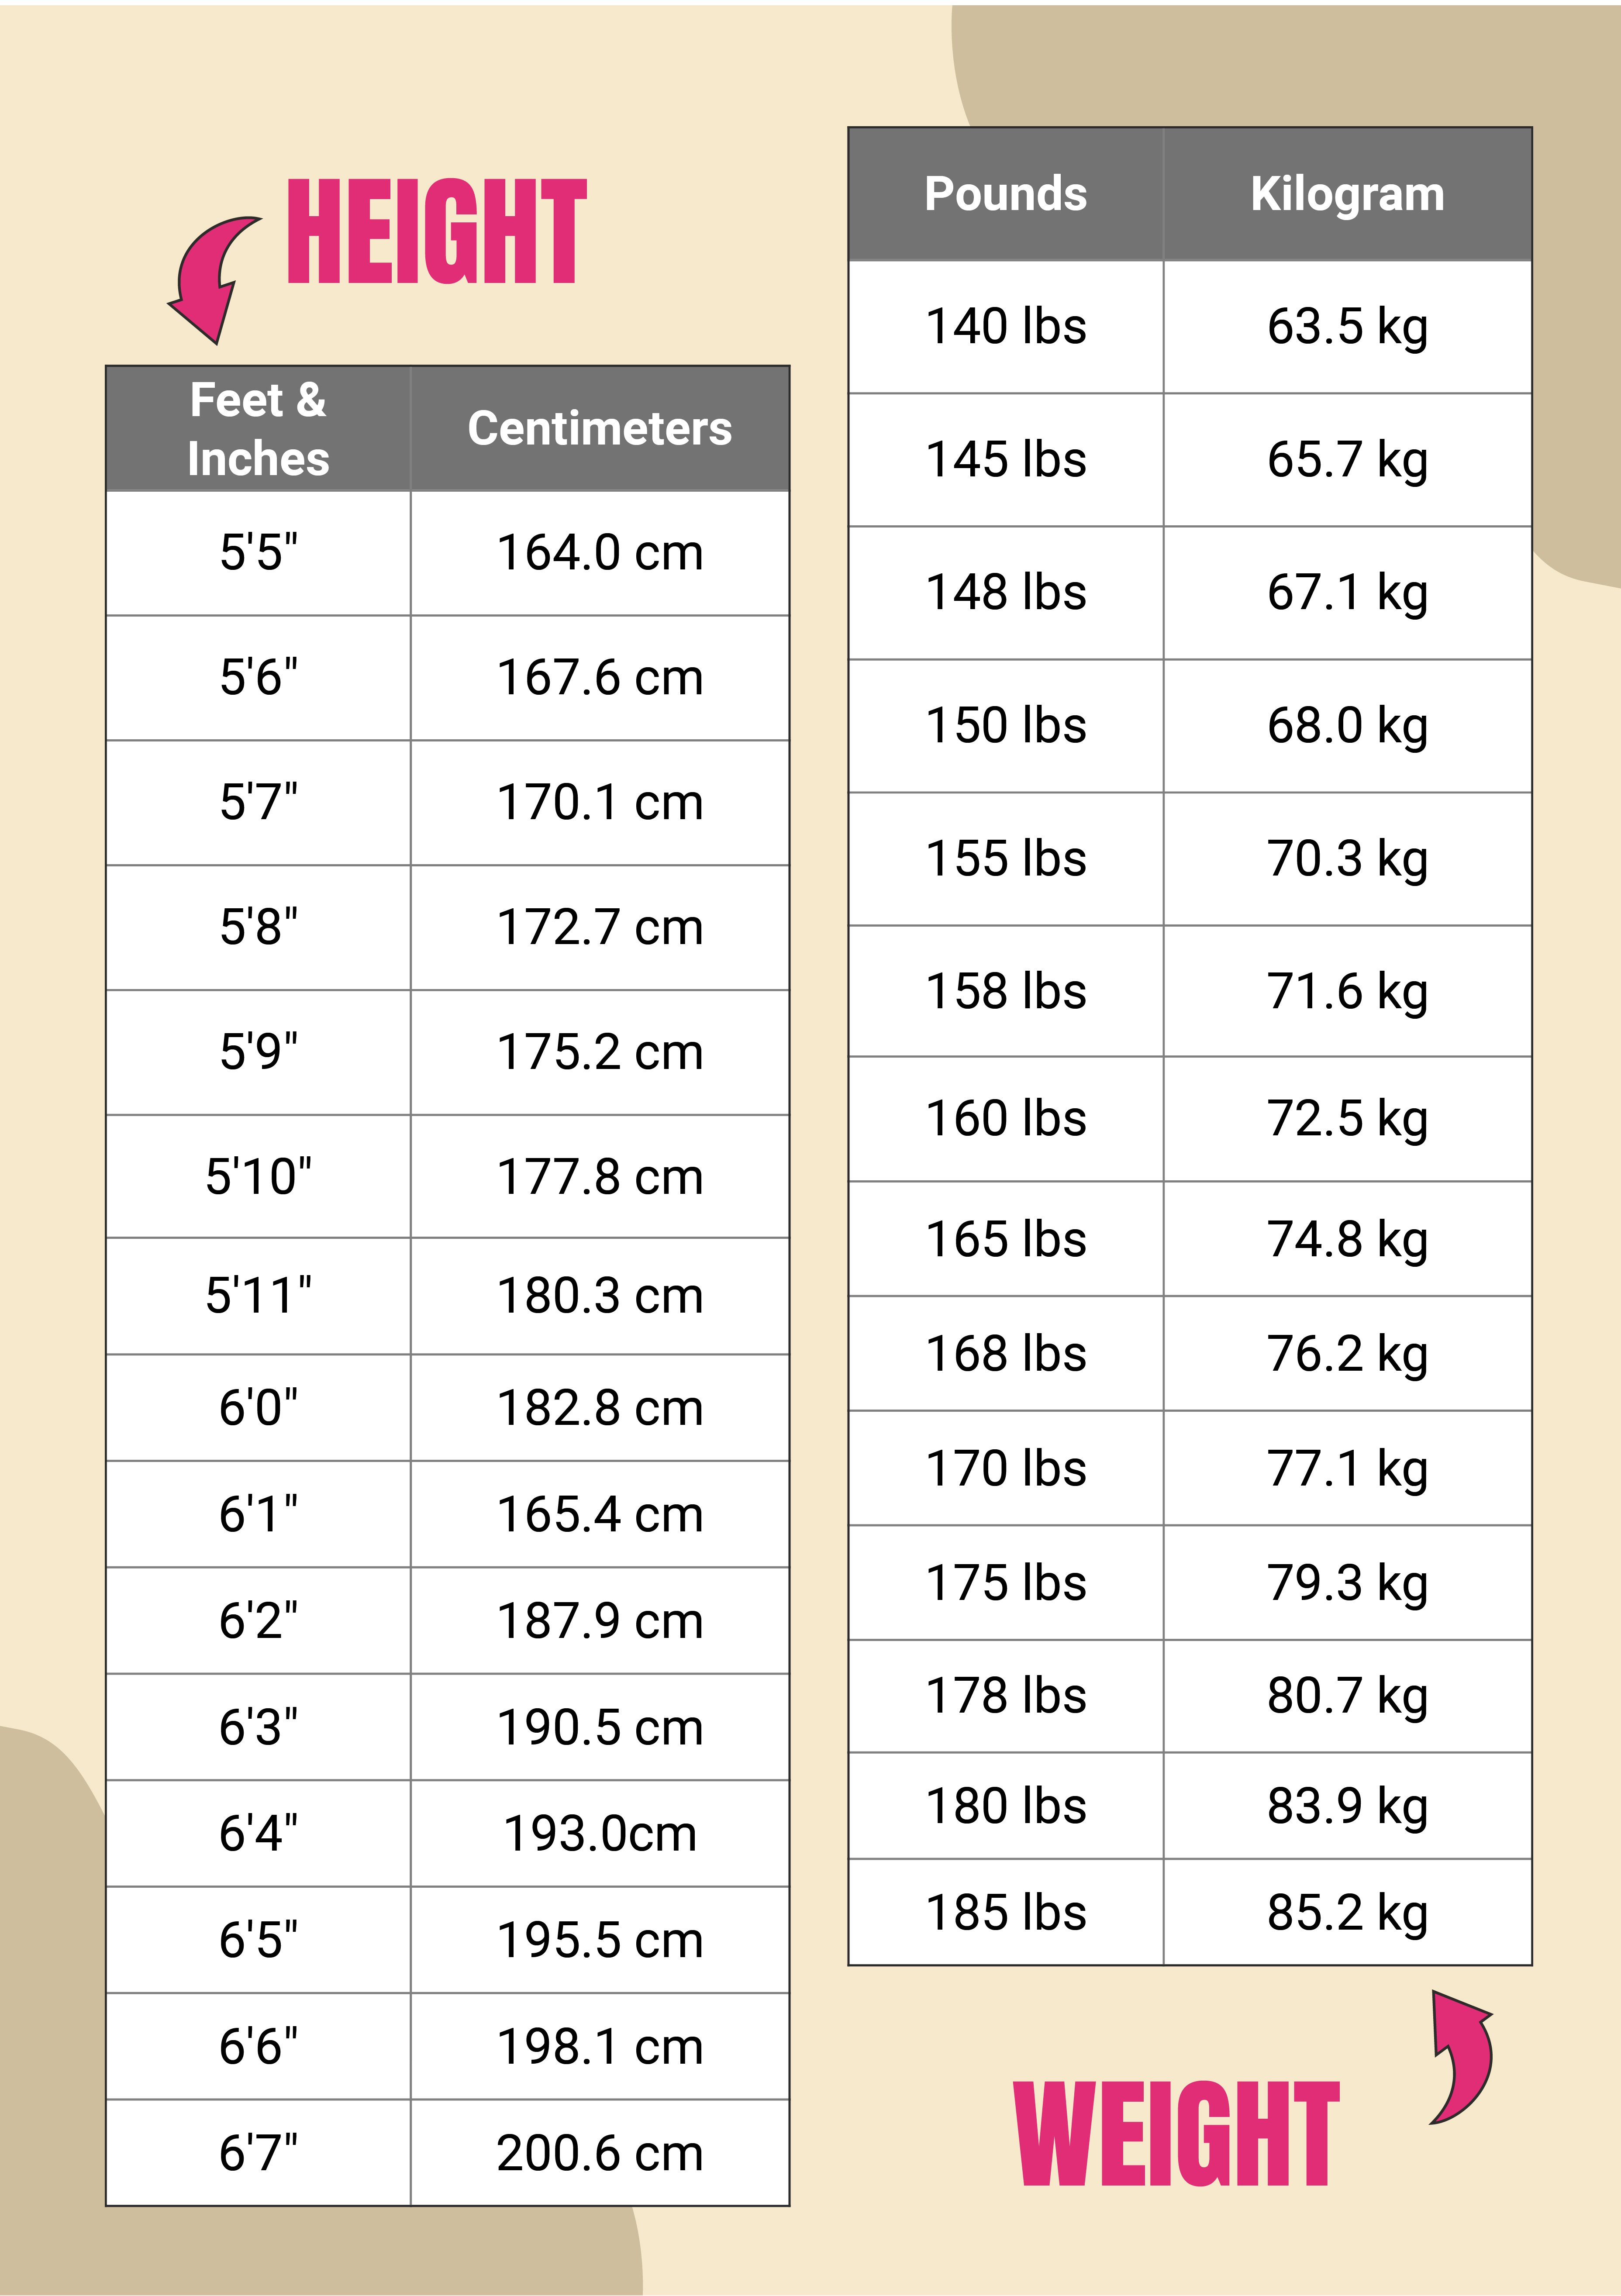 https://images.template.net/115285/height-and-weight-conversion-chart-for-adults-bzbcz.jpg